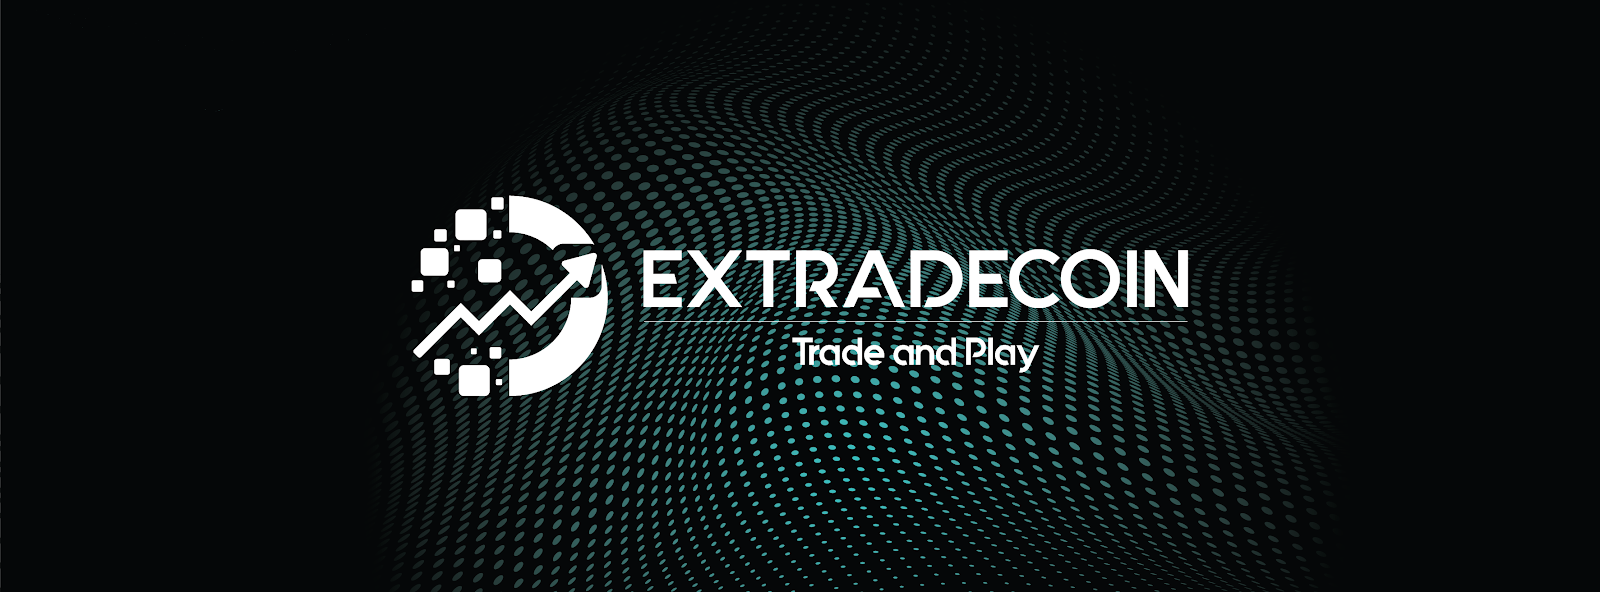 Hasil gambar untuk Extradecoin is a cryptocurrency